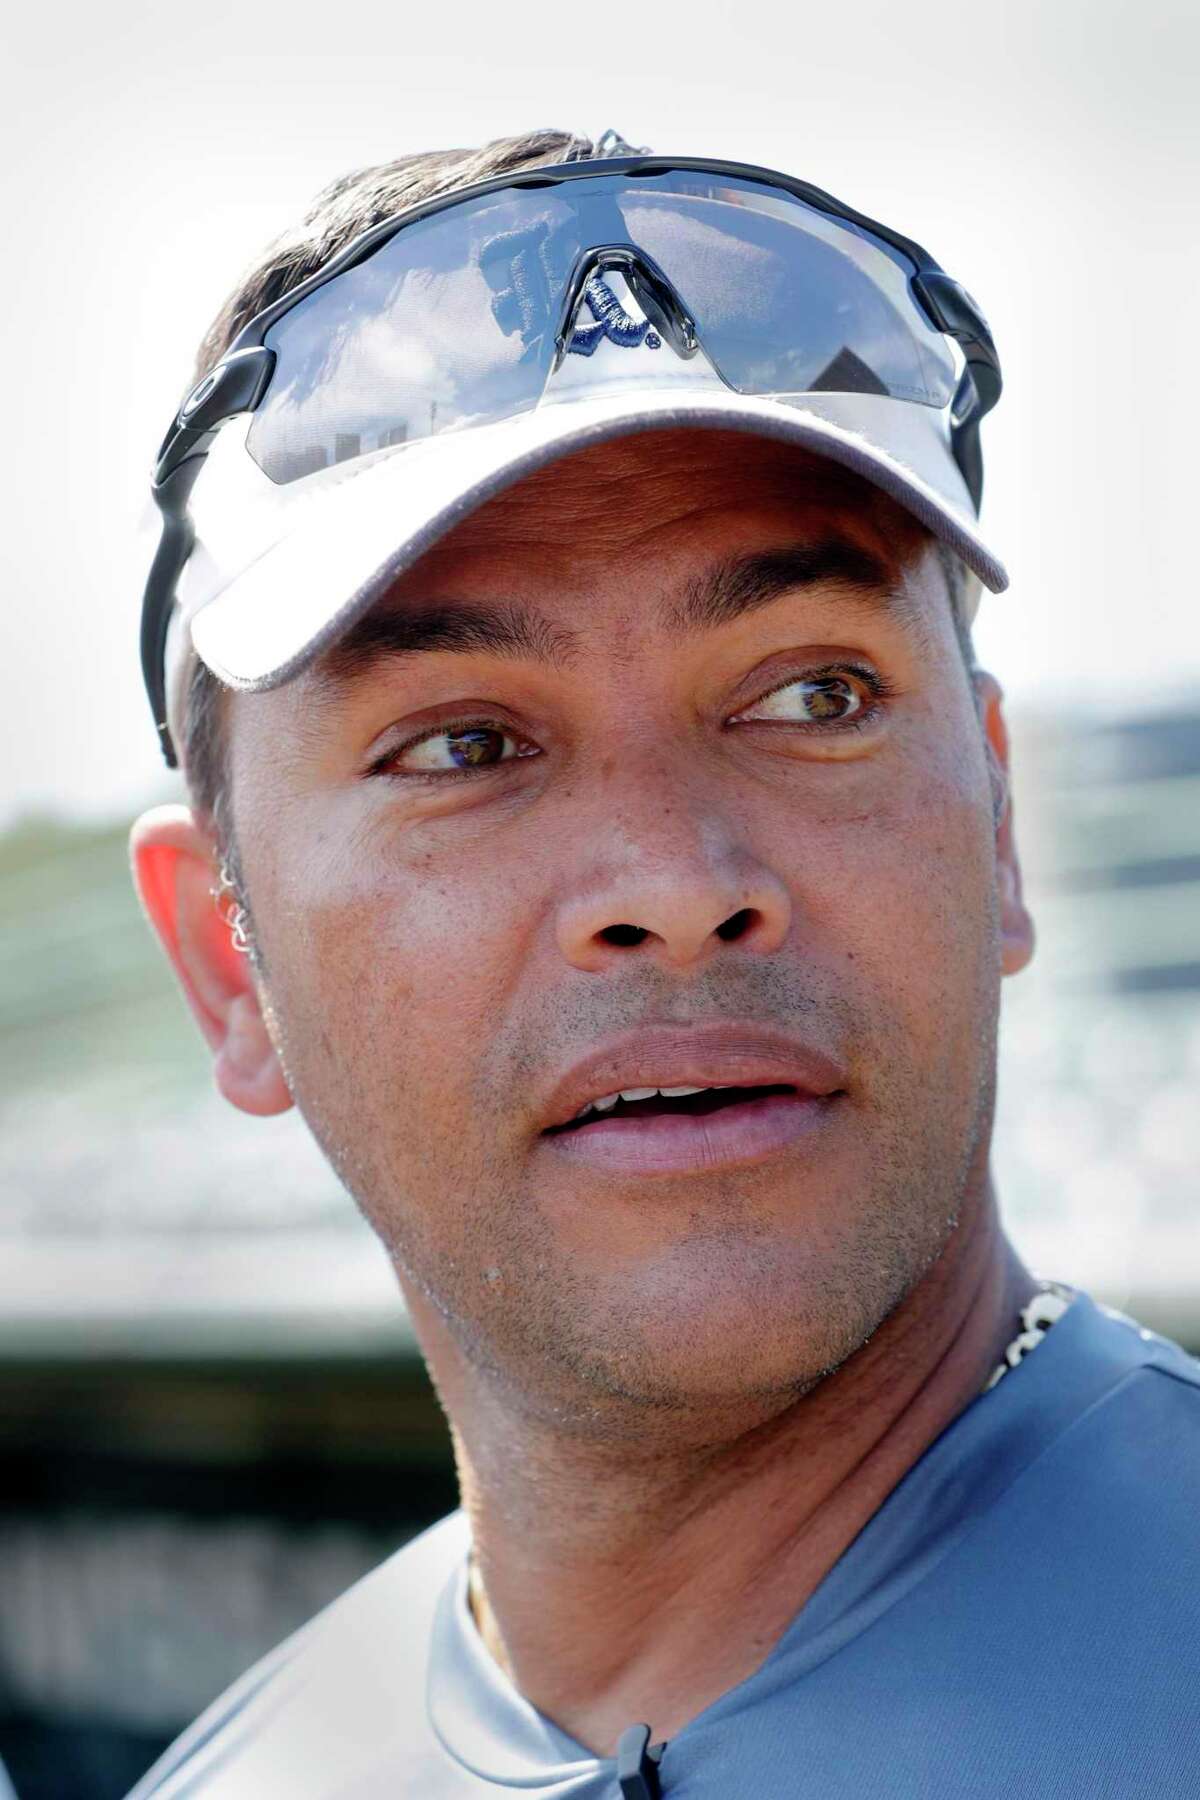 Rice University first year head baseball coach Jose Cruz Jr. holds a press conference before the first scrimmage of the Fall Ball season at Reckling Park Wednesday, Sept. 22, 2021 in Houston, TX.